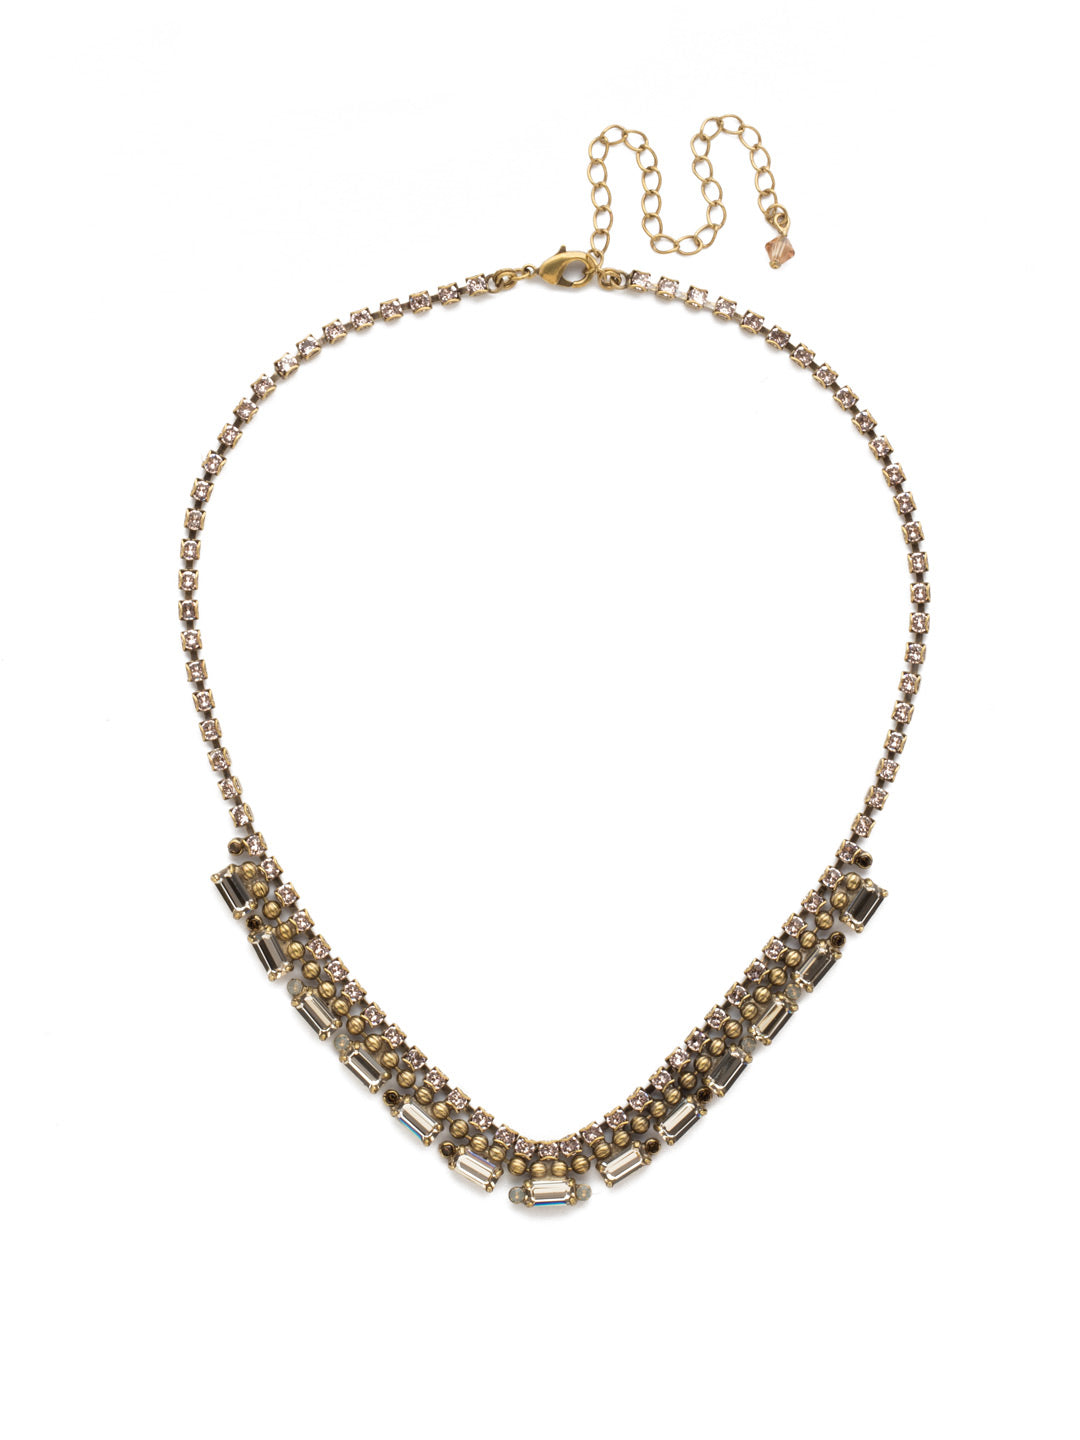 Fescue Necklace - NDX10AGSTN - <p>A row of decorative metal beading sits between a row of baguette crystals and a shimmering rhinestone chain in this stunning style. From Sorrelli's Sandstone collection in our Antique Gold-tone finish.</p>